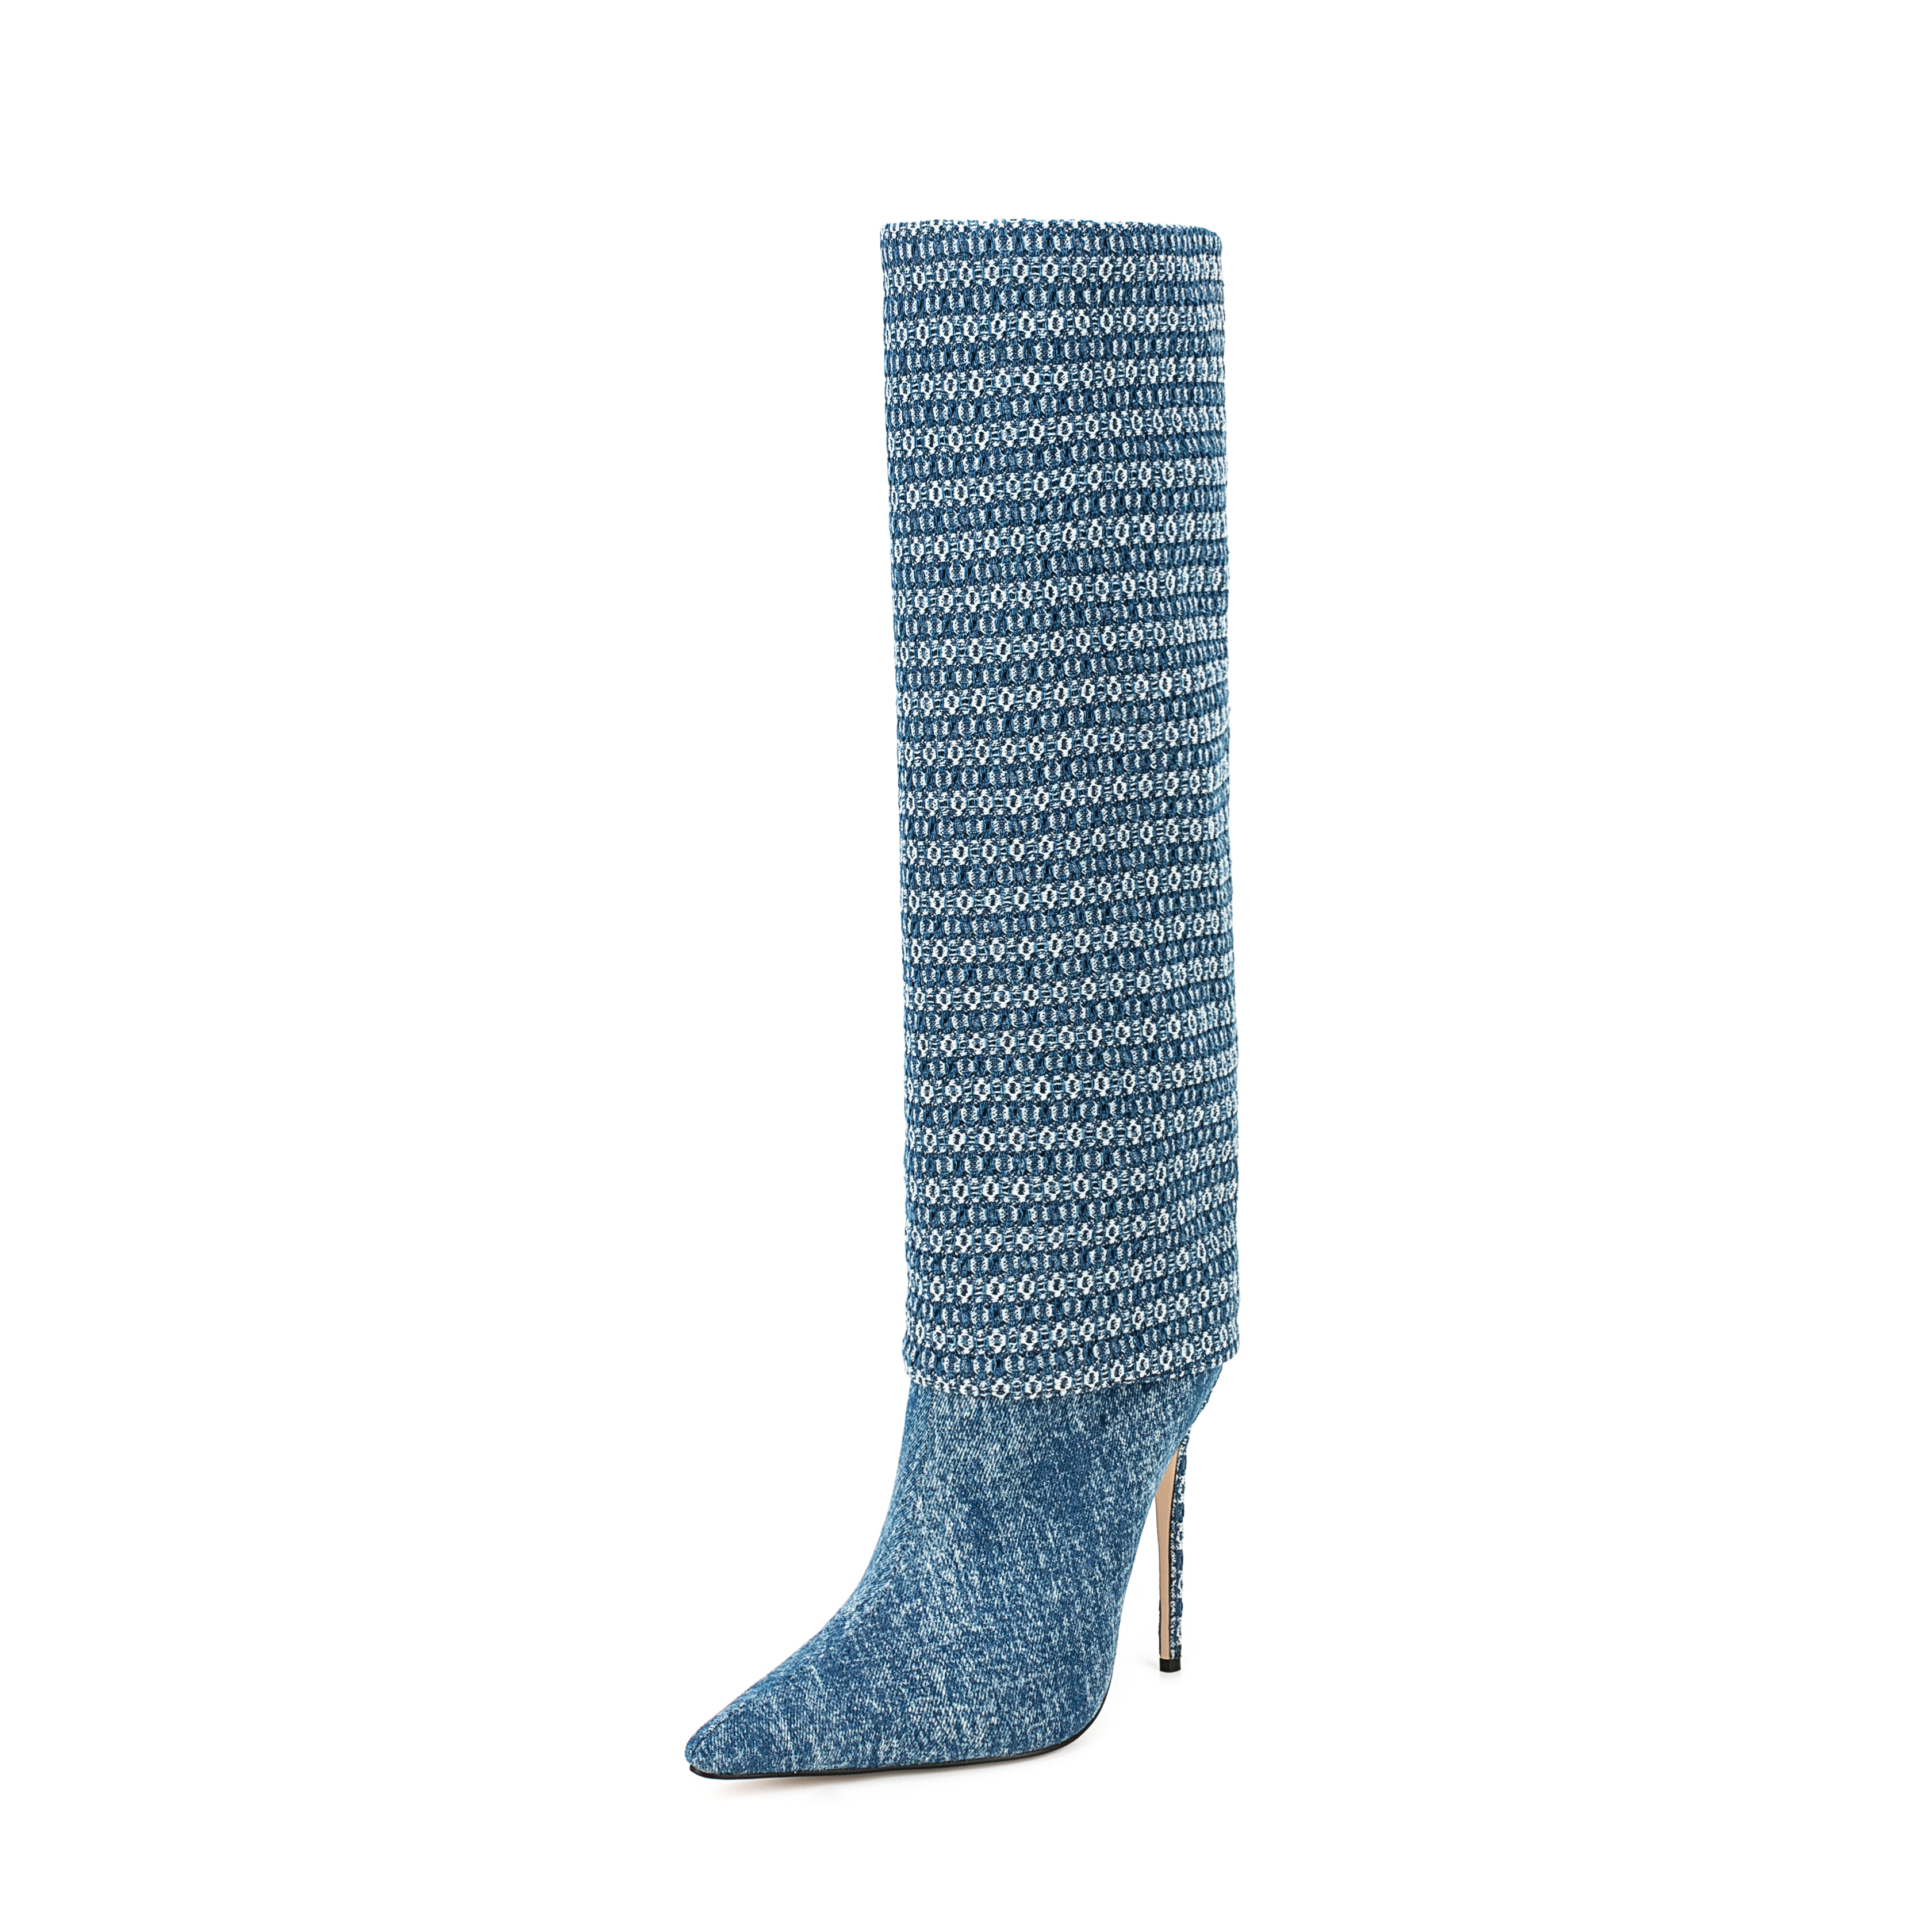 TAAFO High Heels Women Fold Over Woven Plaid Denim Boots Large Size Party Ladies Knee High Boots